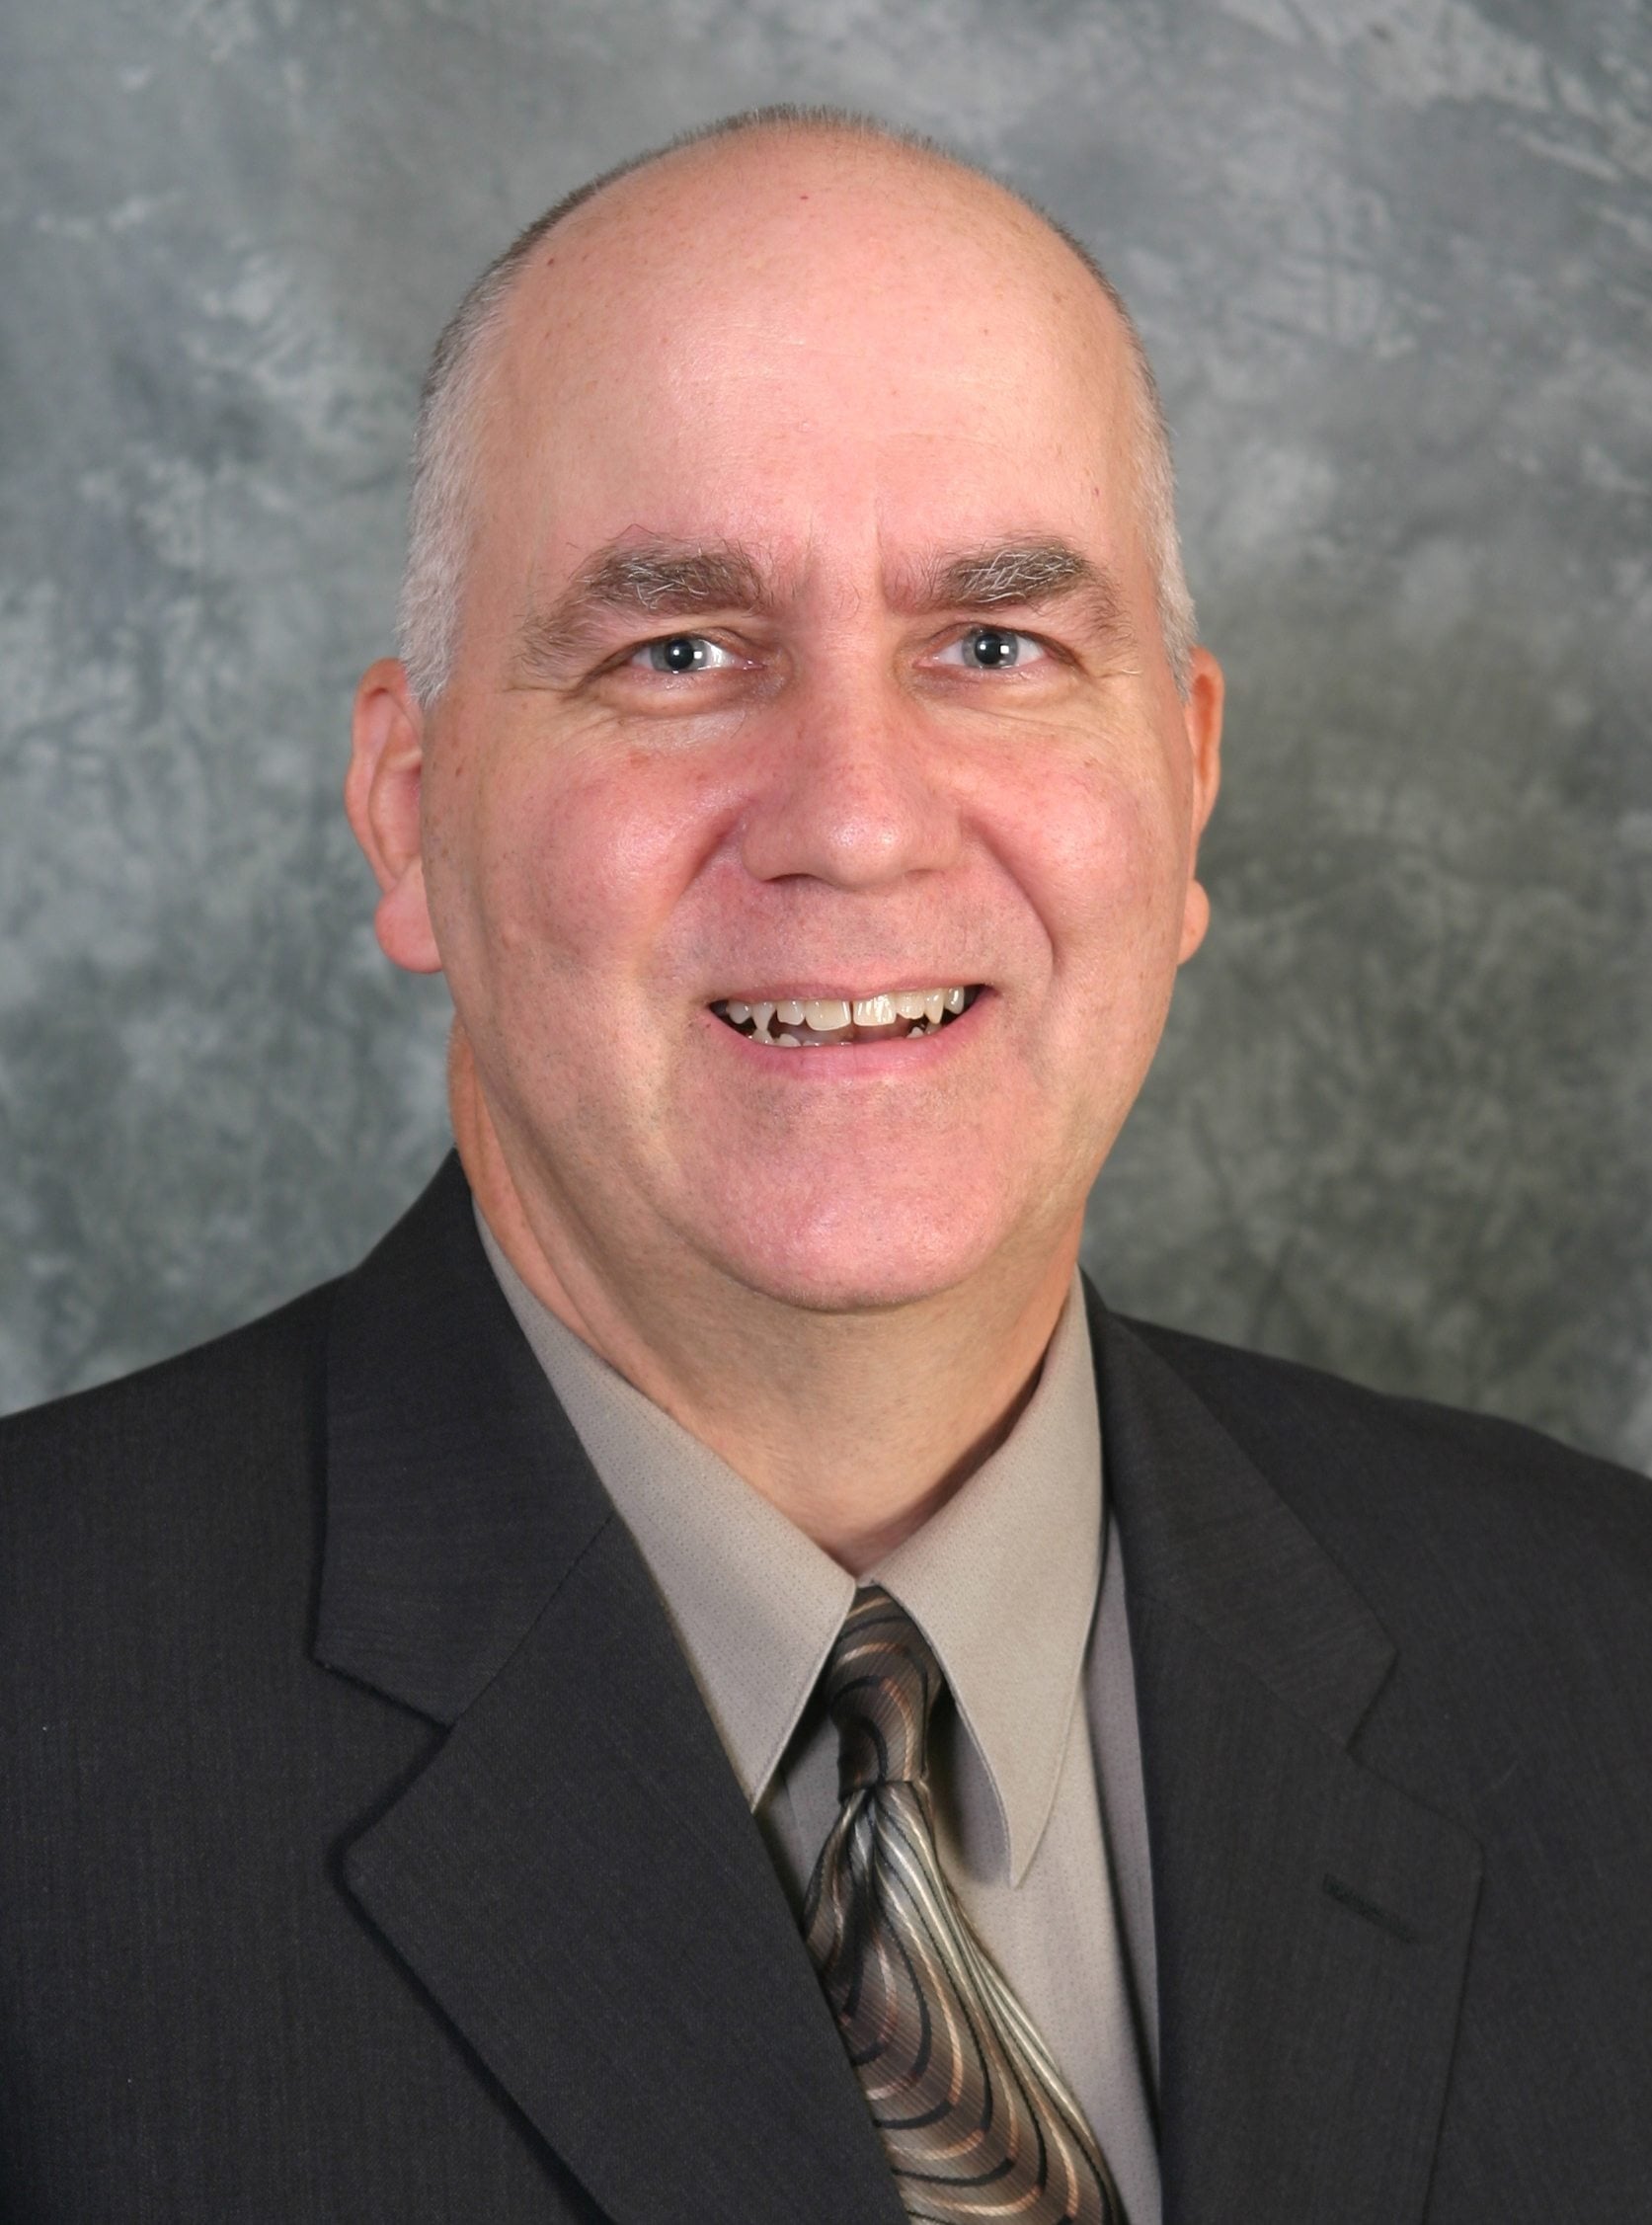 Ron Wysaske is president and COO of Riverview Community Bank.